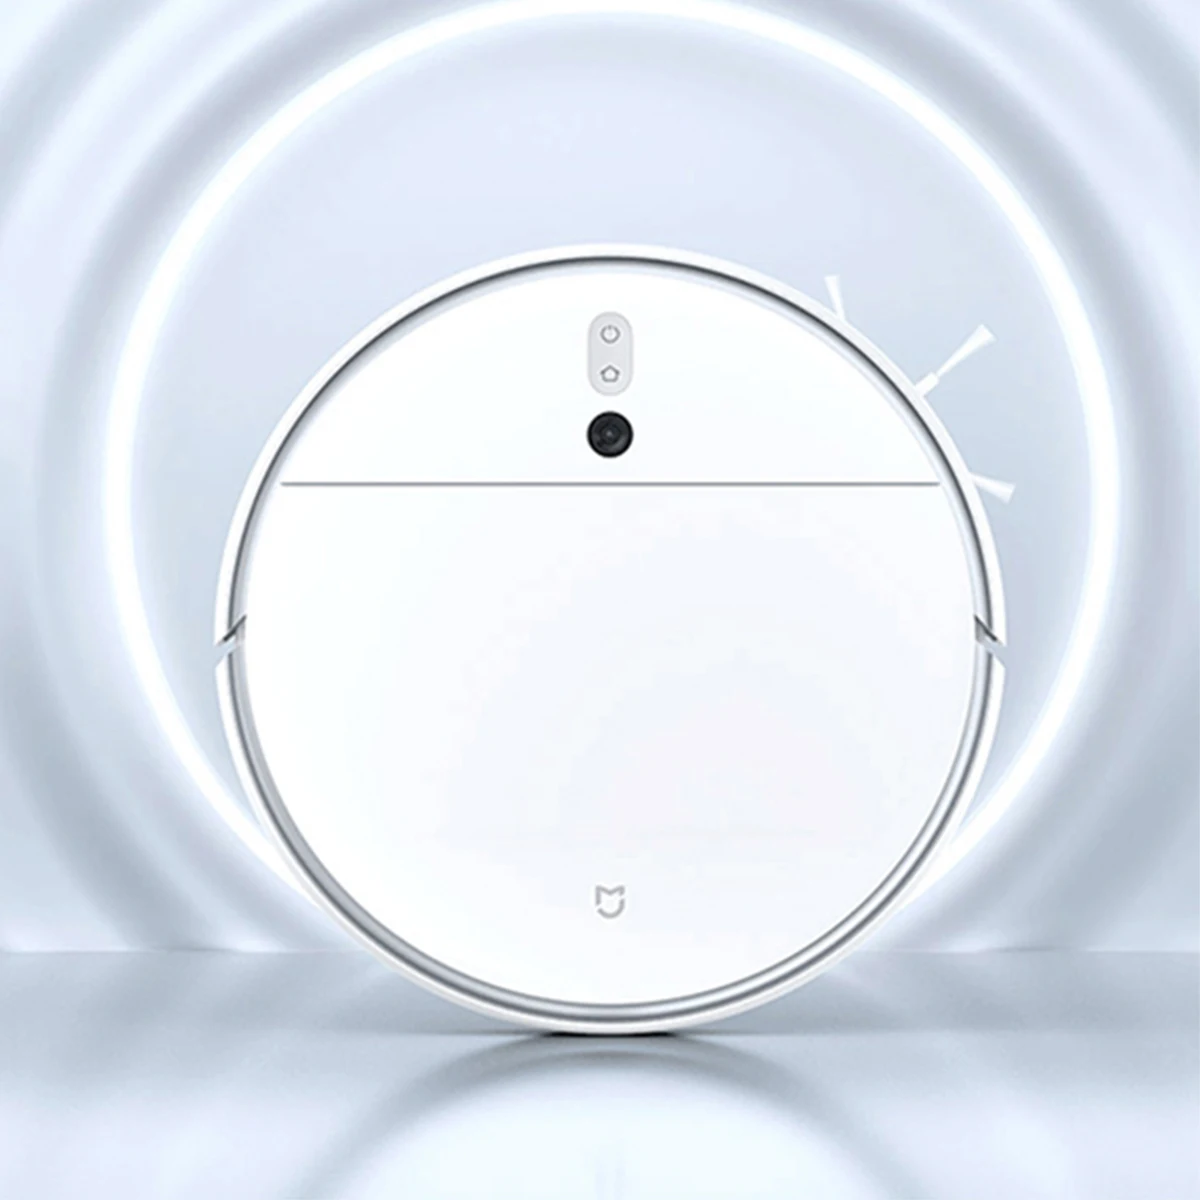 

XIAOMI MIJIA Mop Robot Vacuum Cleaner 2C for Home Auto Sweeping Mopping Dust Sterilize 2700Pa Cyclone Suction Smart Planned App